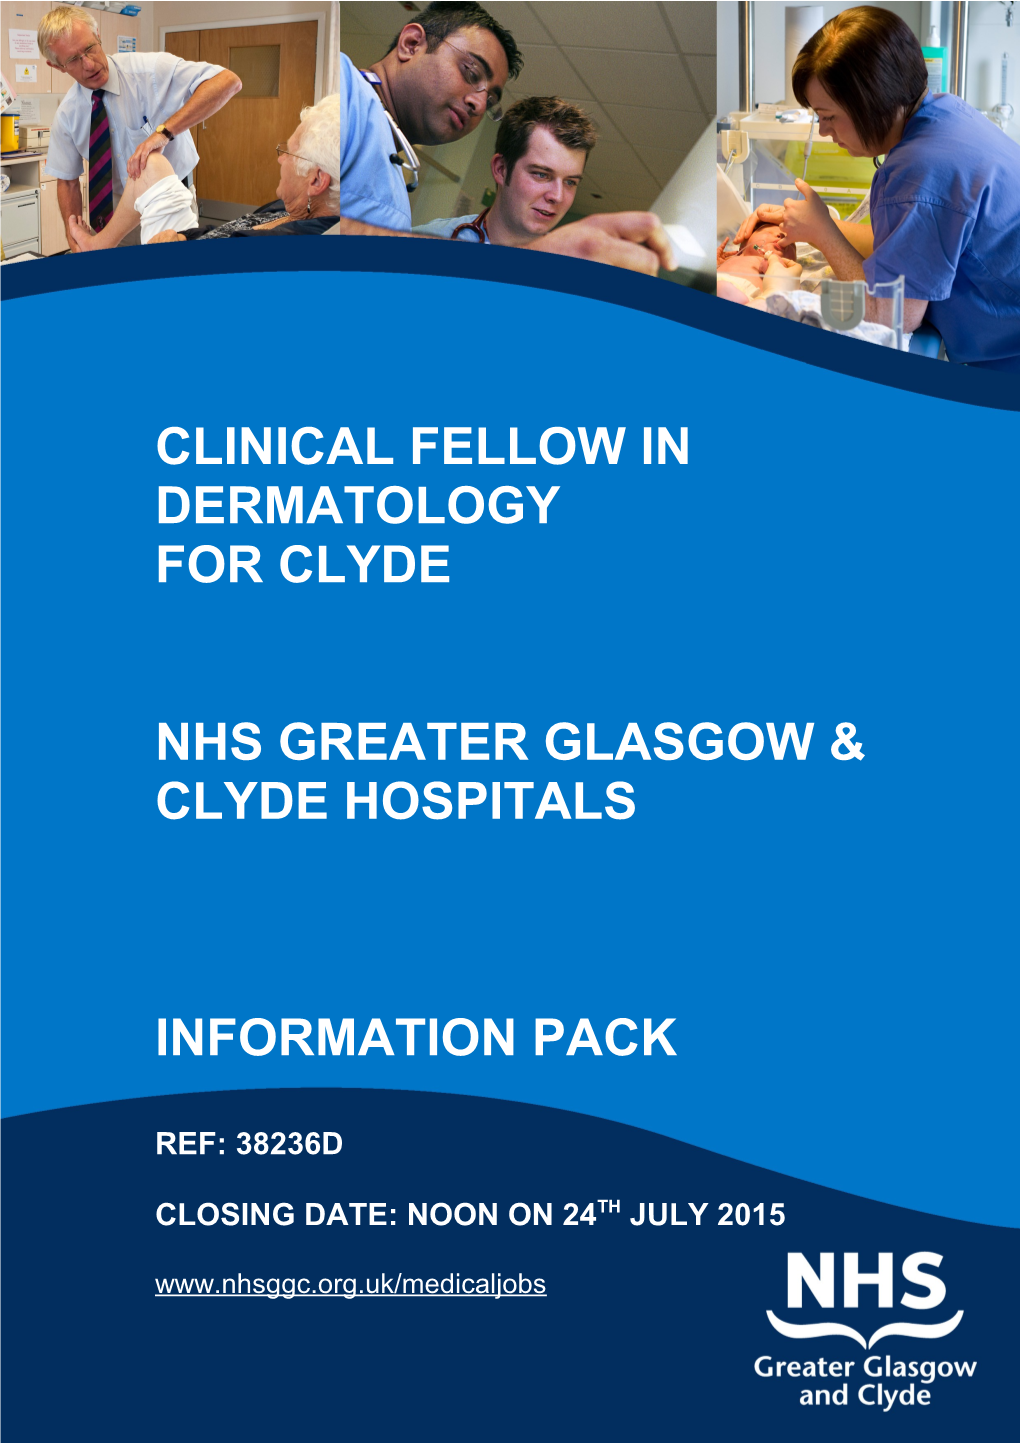 Nhs Greater Glasgow & Clyde Hospitals